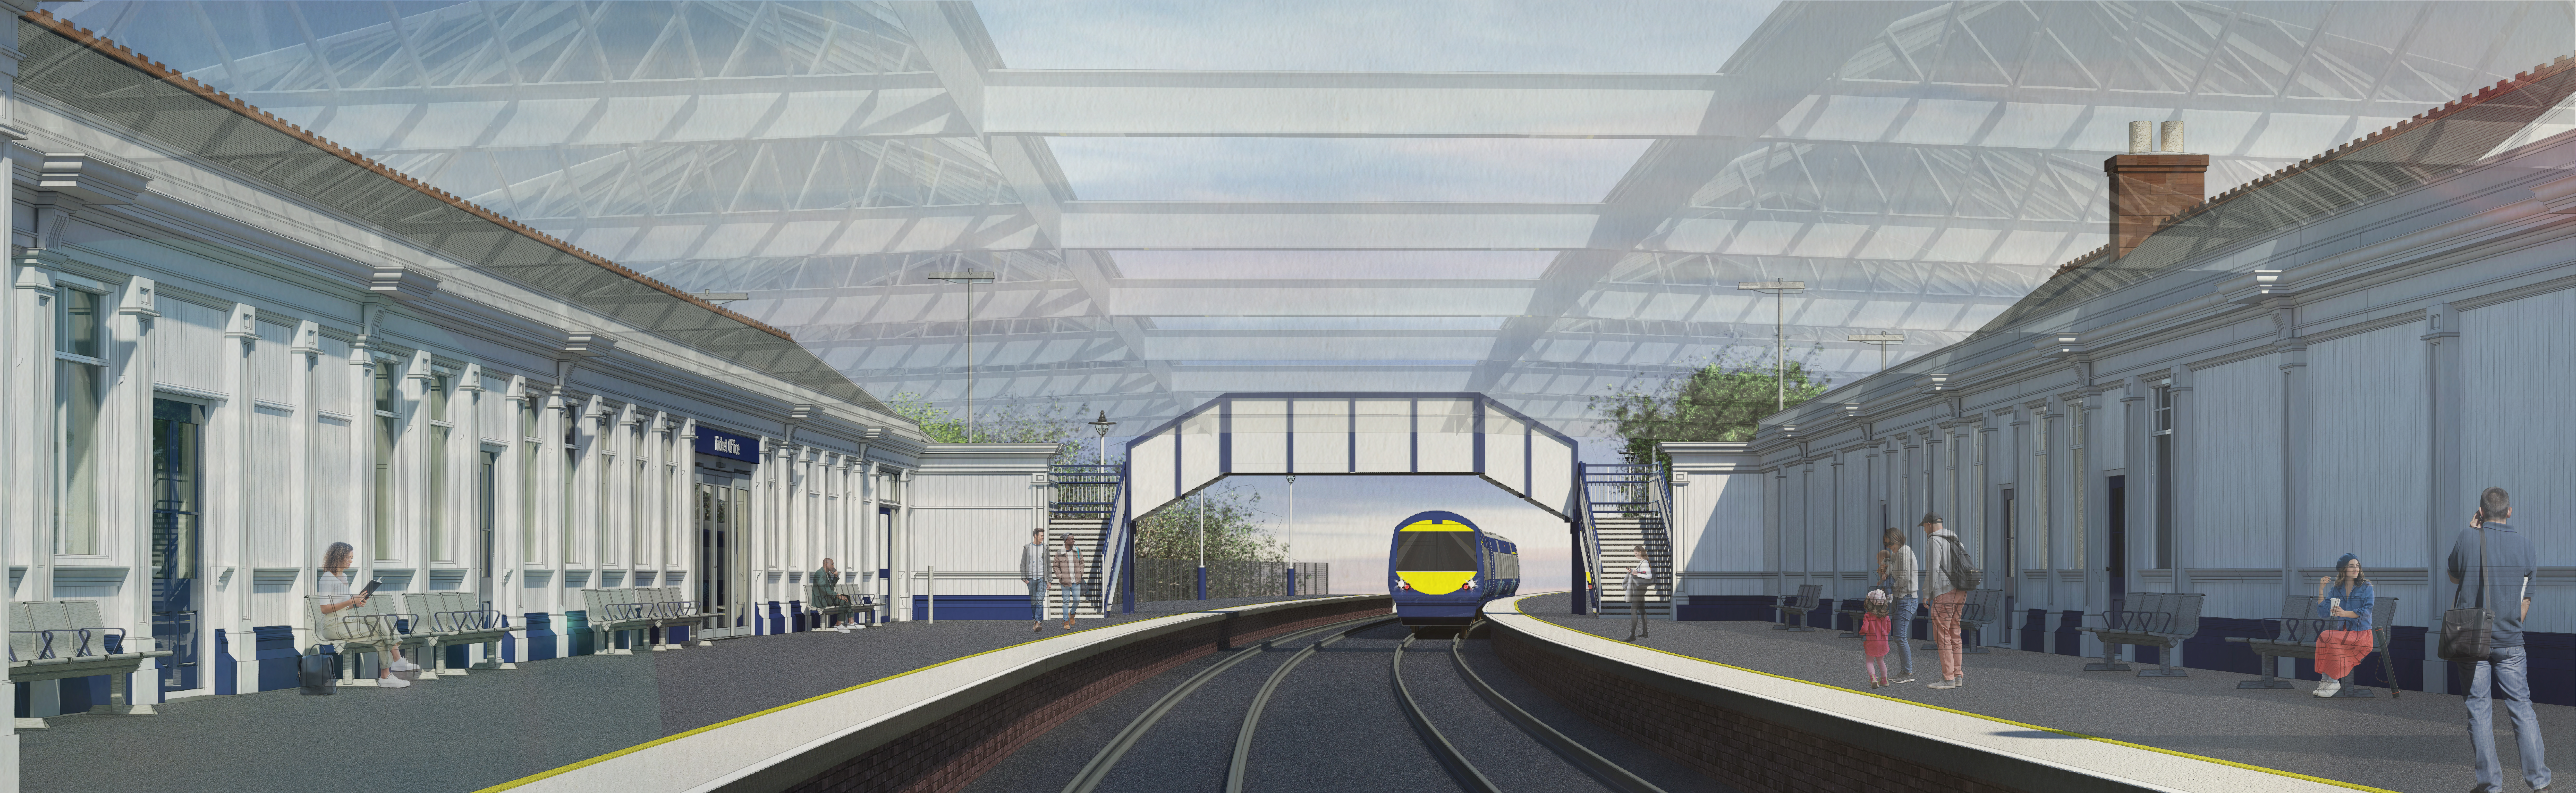 Troon station preferred option selected